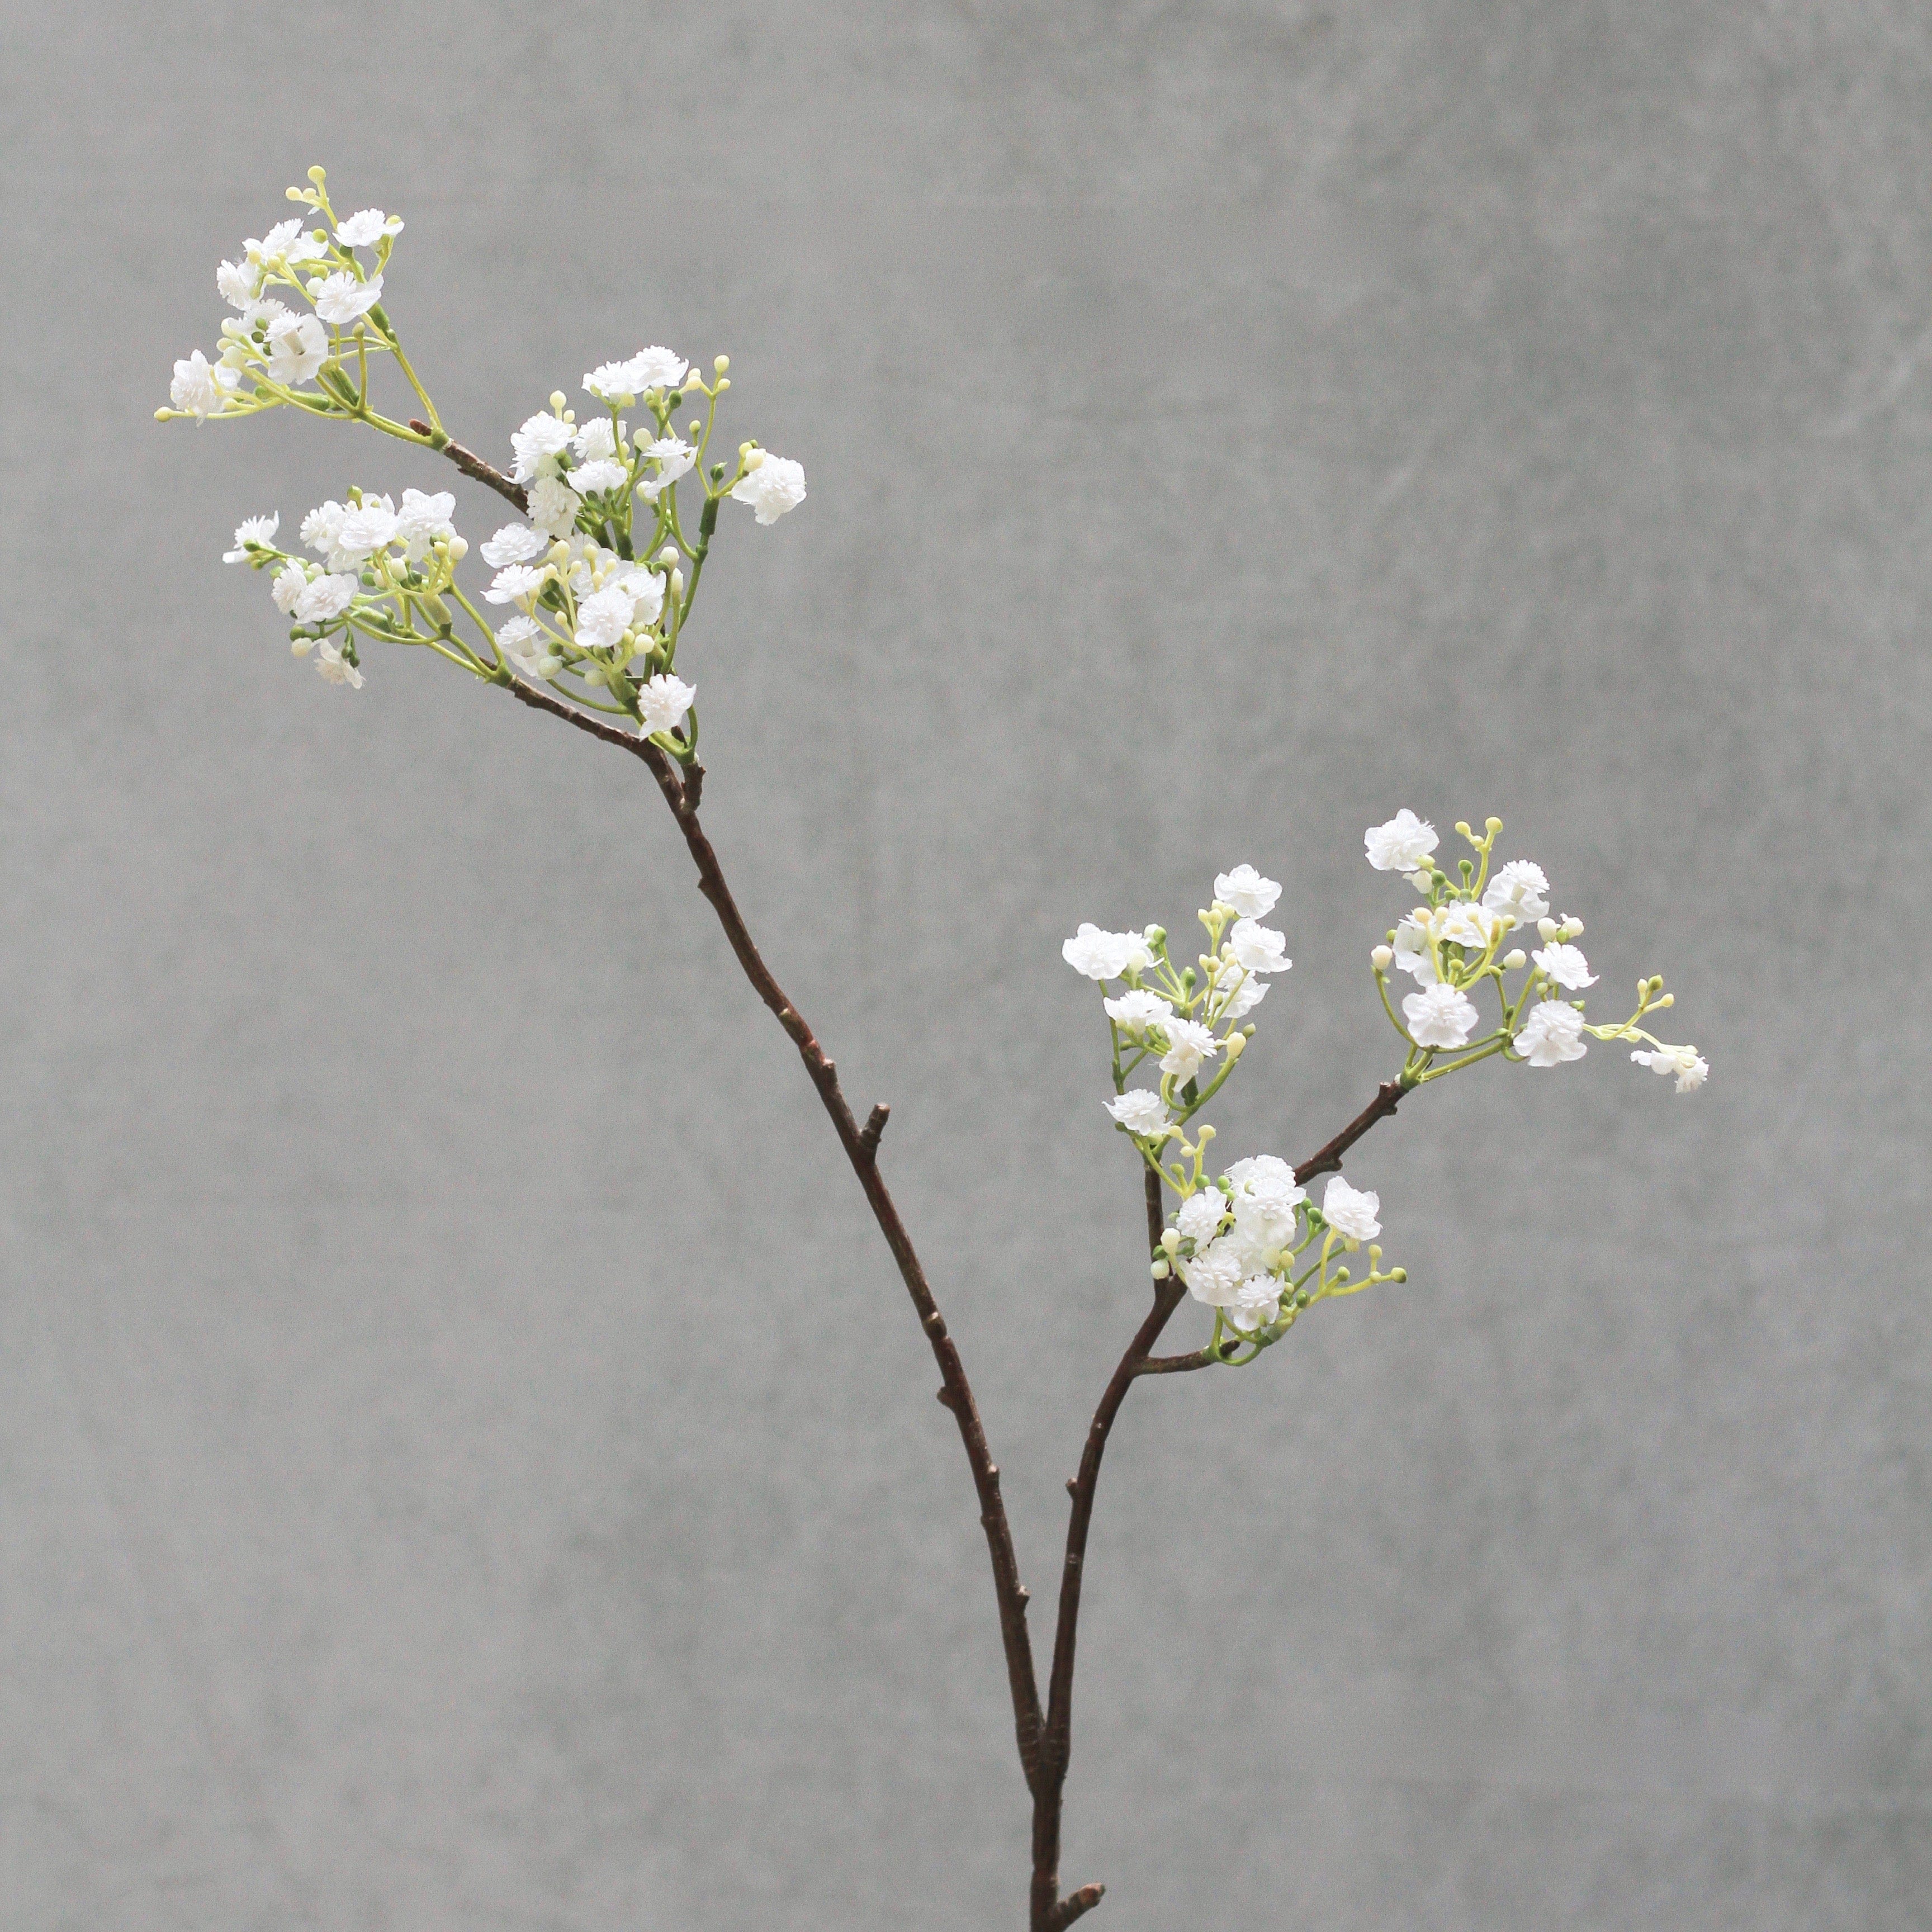 Artificial cherry blossom flowers luxury faux cherry blossom branches silk white gypsophila realistic realistic faux cherry blossom branches flowers Amaranthine Blooms UK